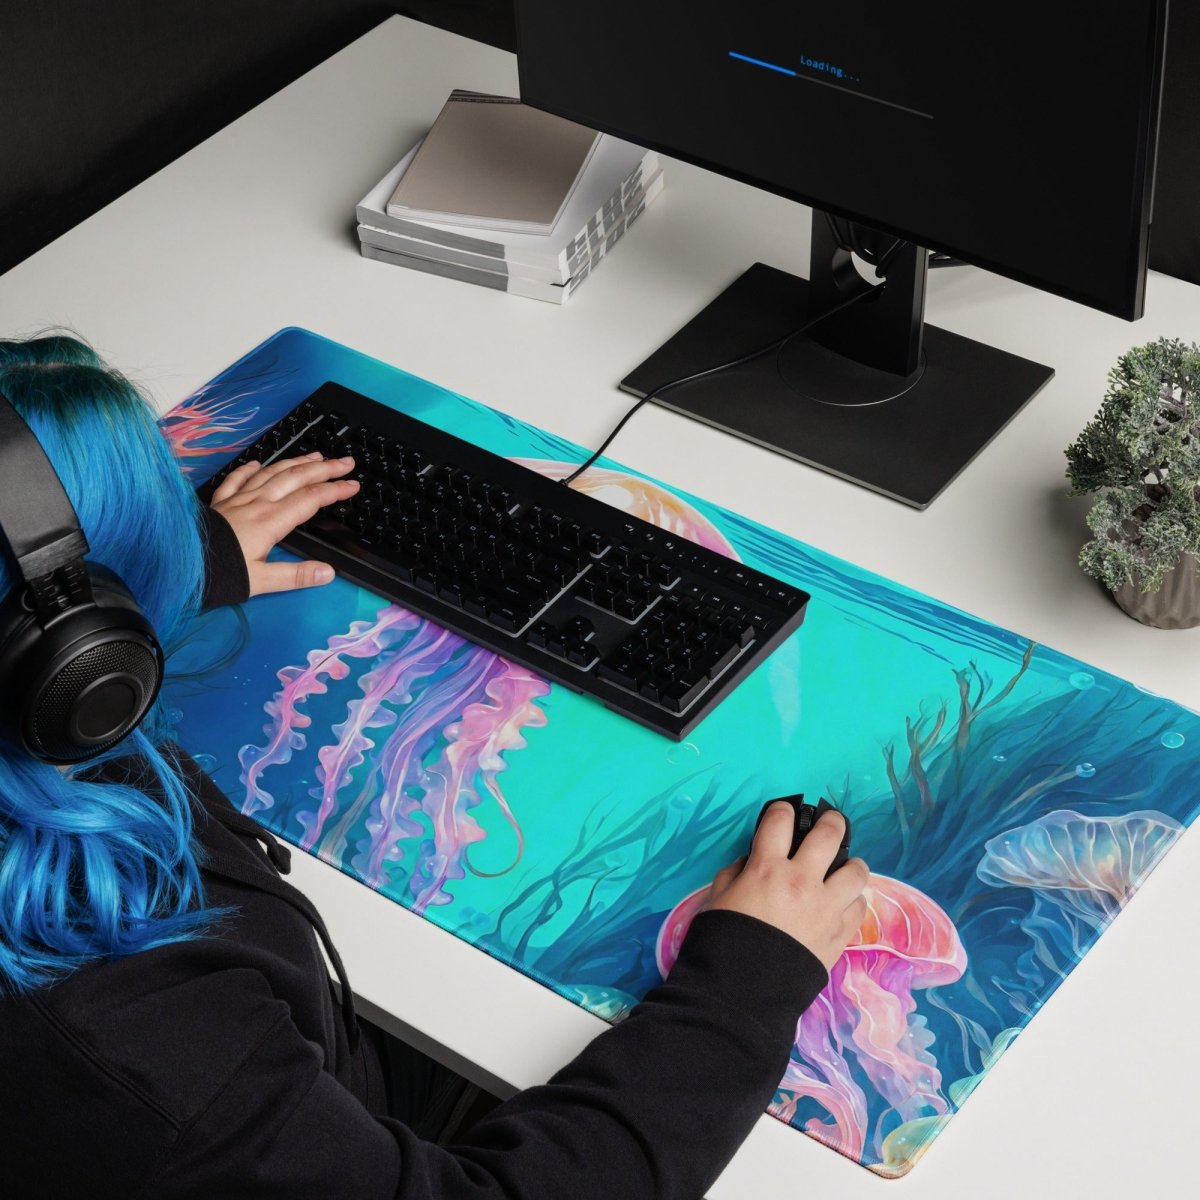 Jellyfish voyage - Gaming mouse pad - Ever colorful